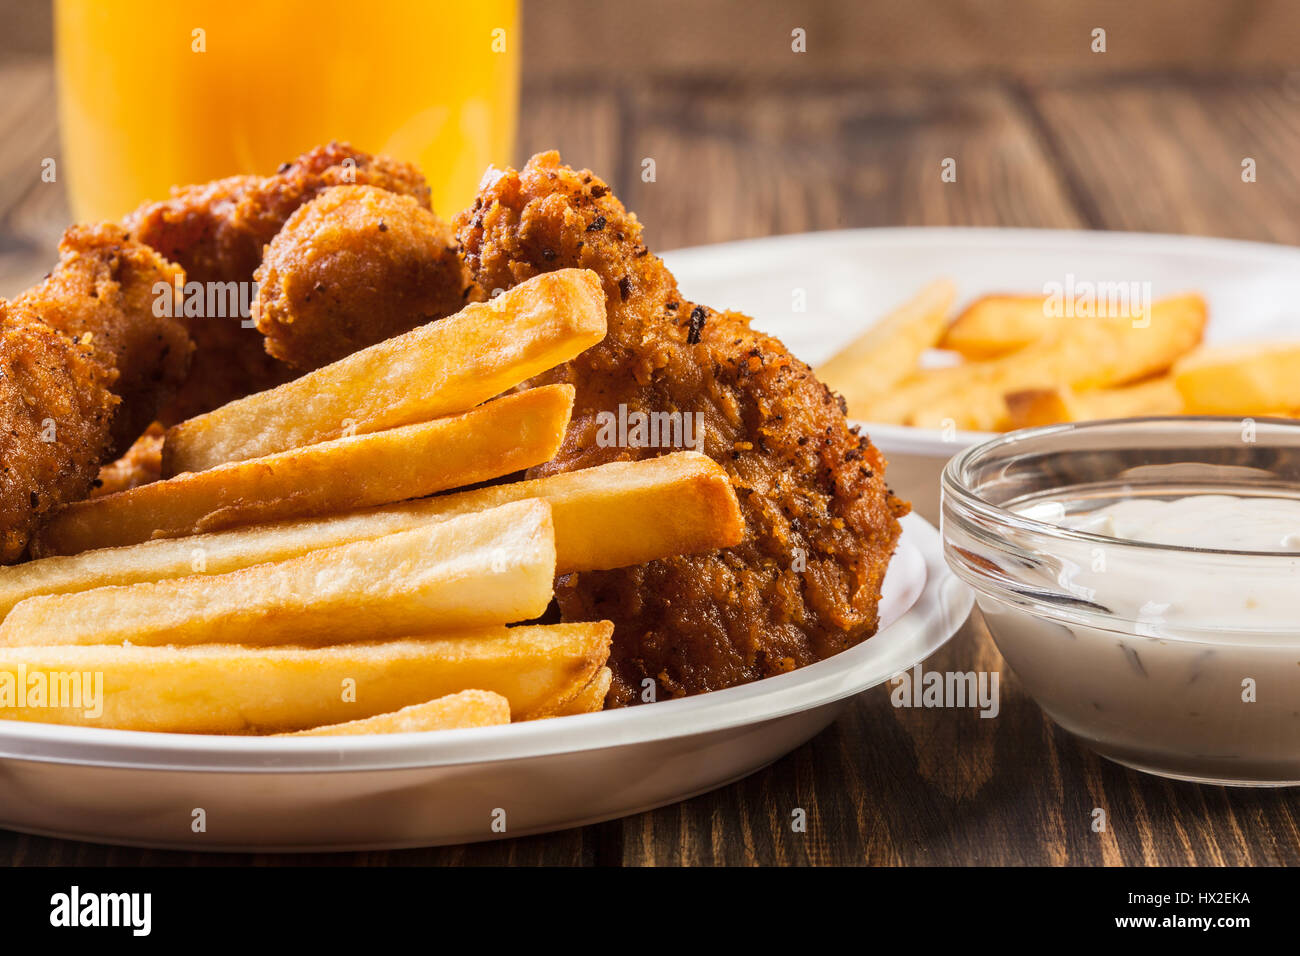 Crisp crunchy golden chicken wings with chips Stock Photo